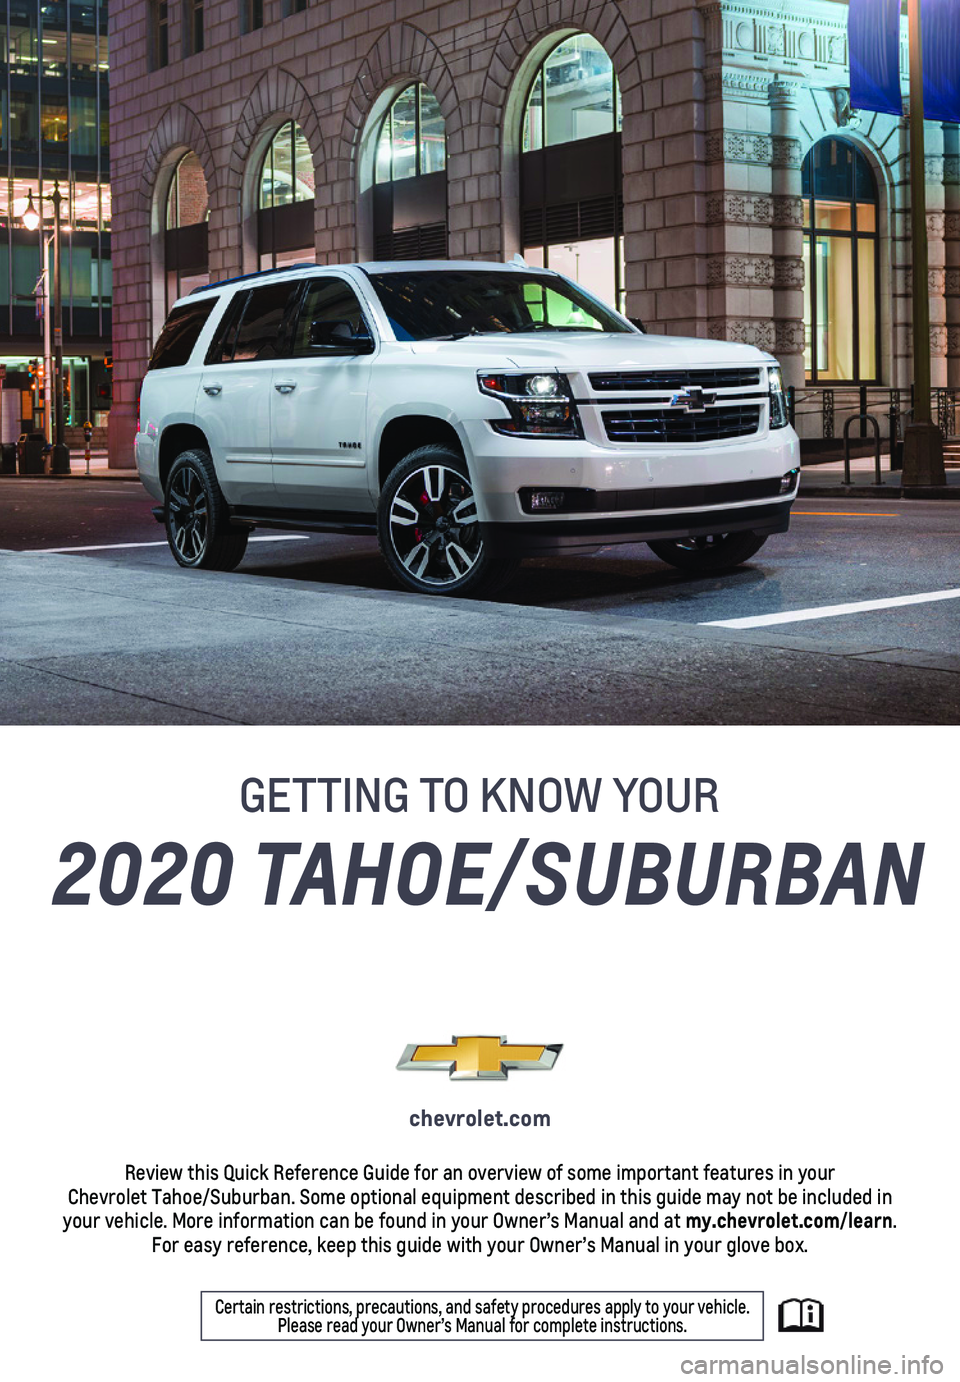 CHEVROLET SUBURBAN 2020  Get To Know Guide 1
2020 TAHOE/SUBURBAN
chevrolet.com
Review this Quick Reference Guide for an overview of some important feat\
ures in your  Chevrolet Tahoe/Suburban. Some optional equipment described in this guid\
e 